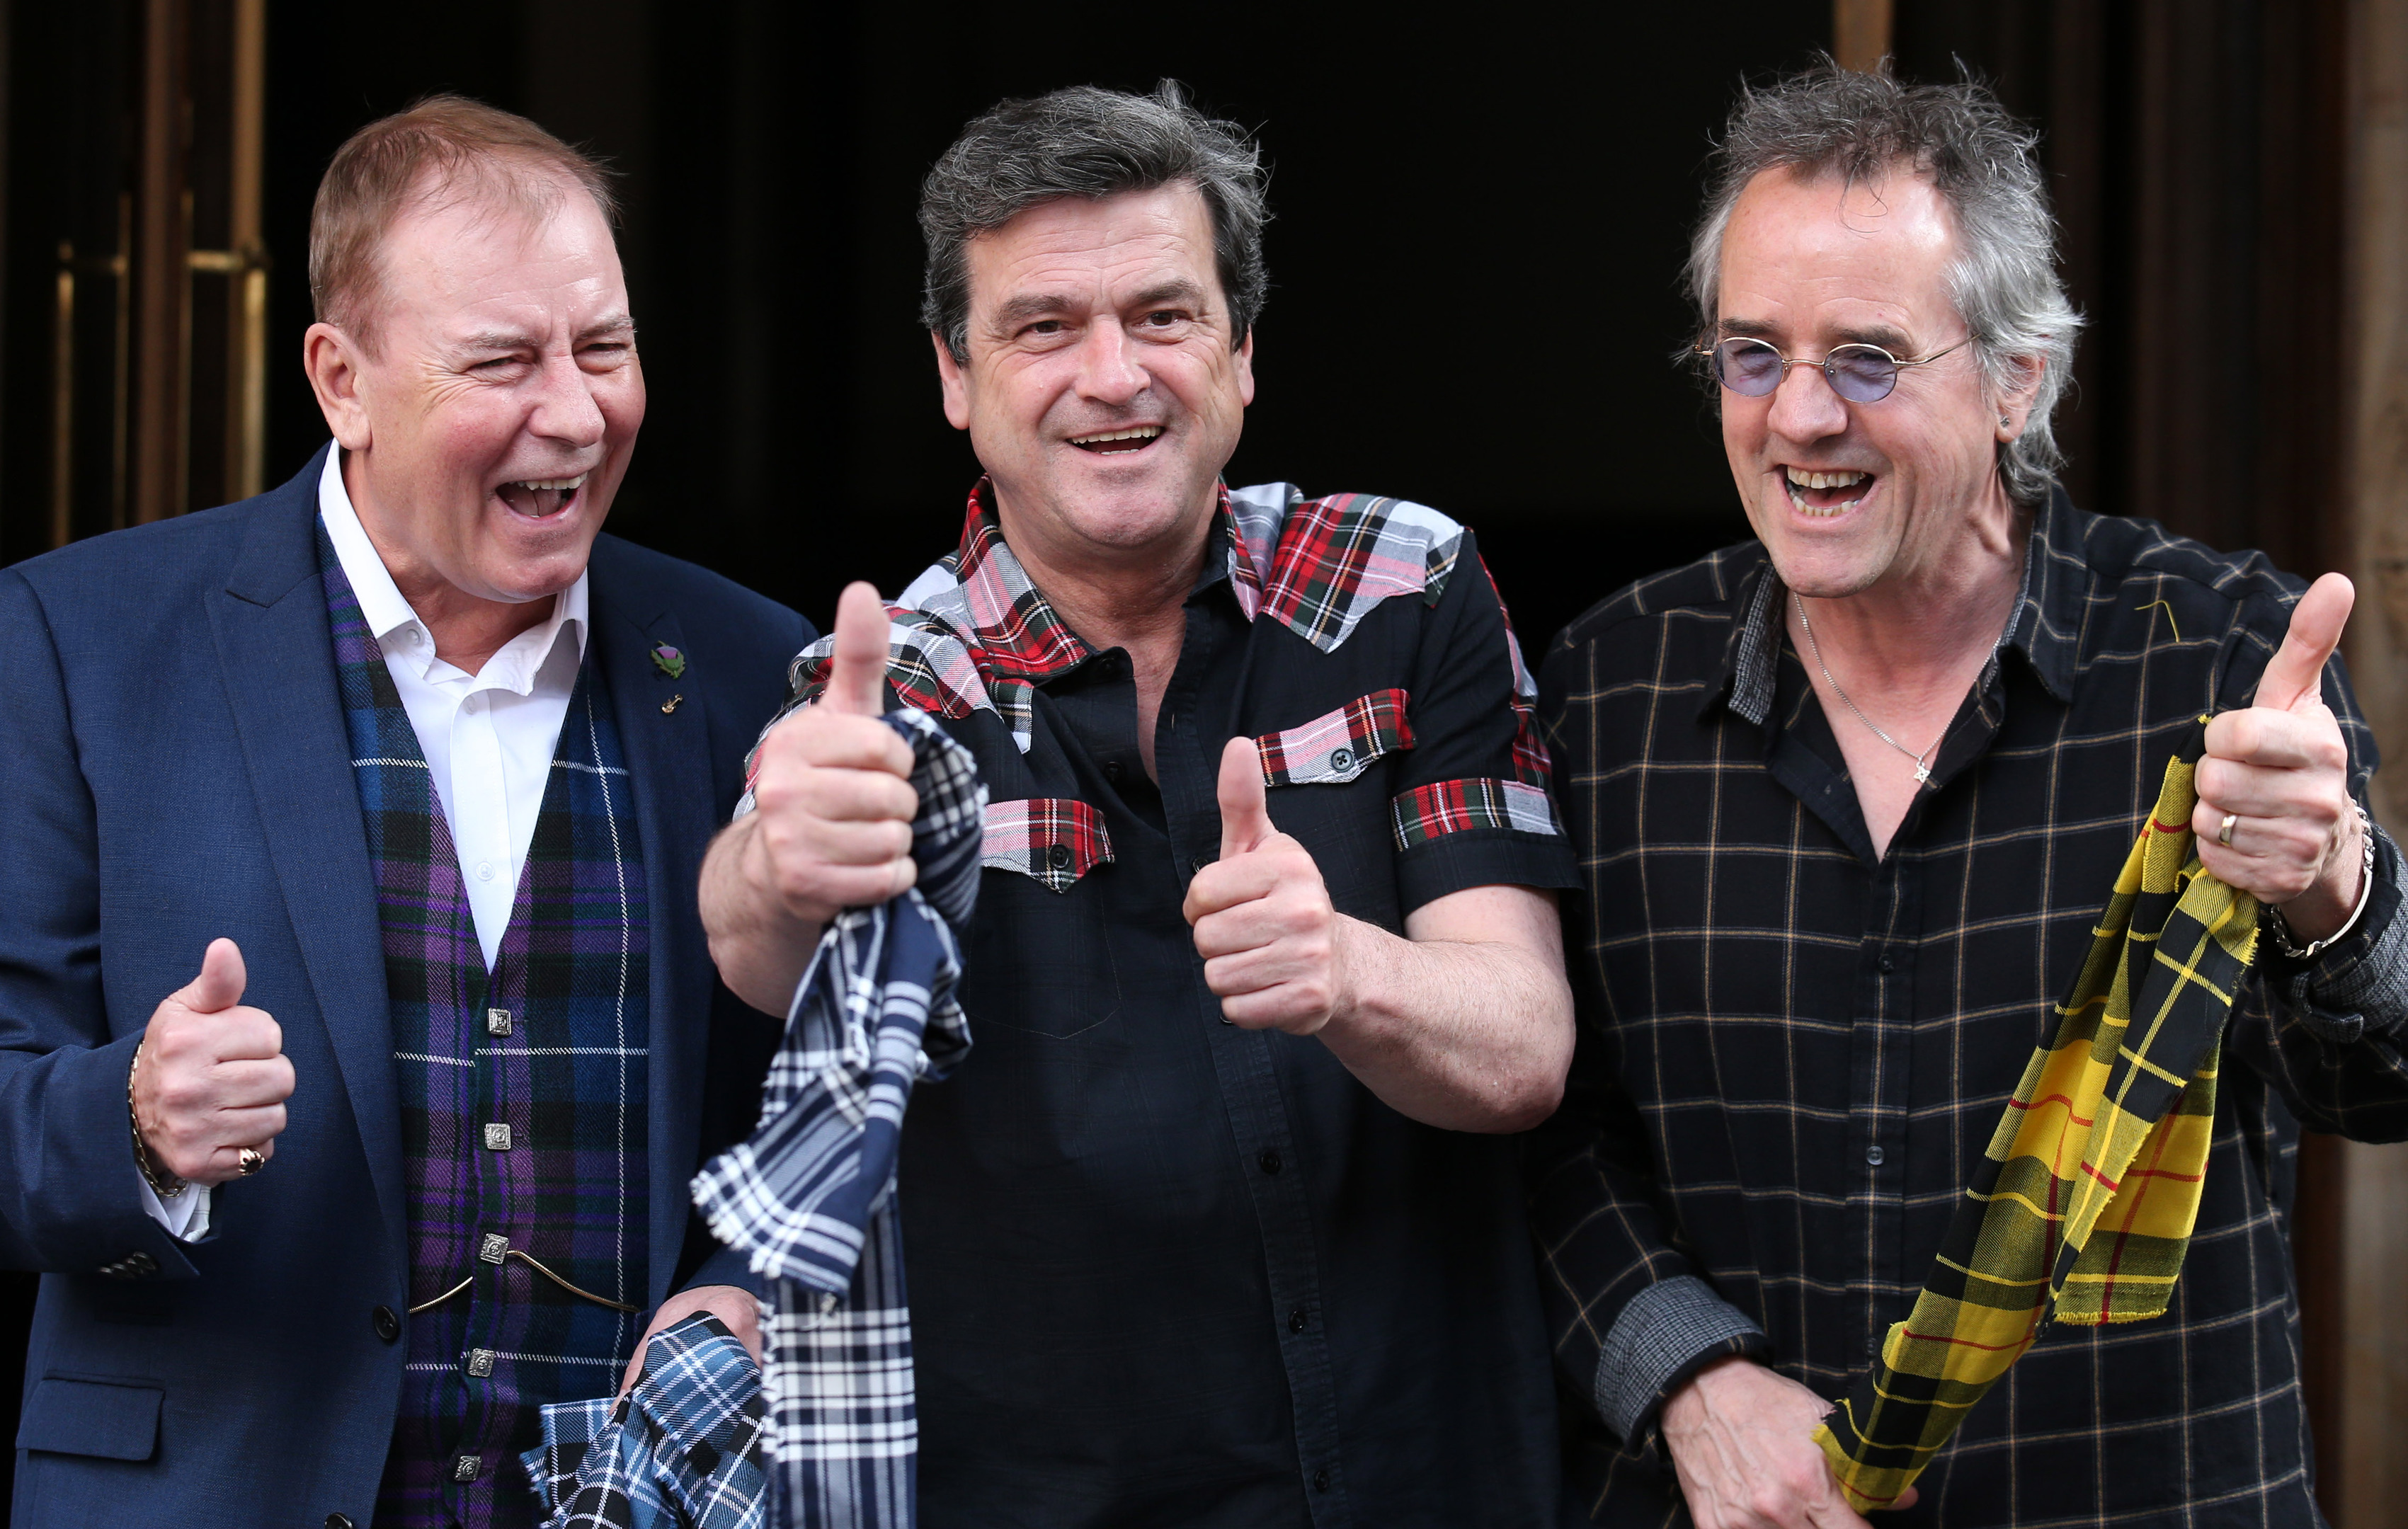 Bay City Rollers reunion gig tickets sell out in three minutes